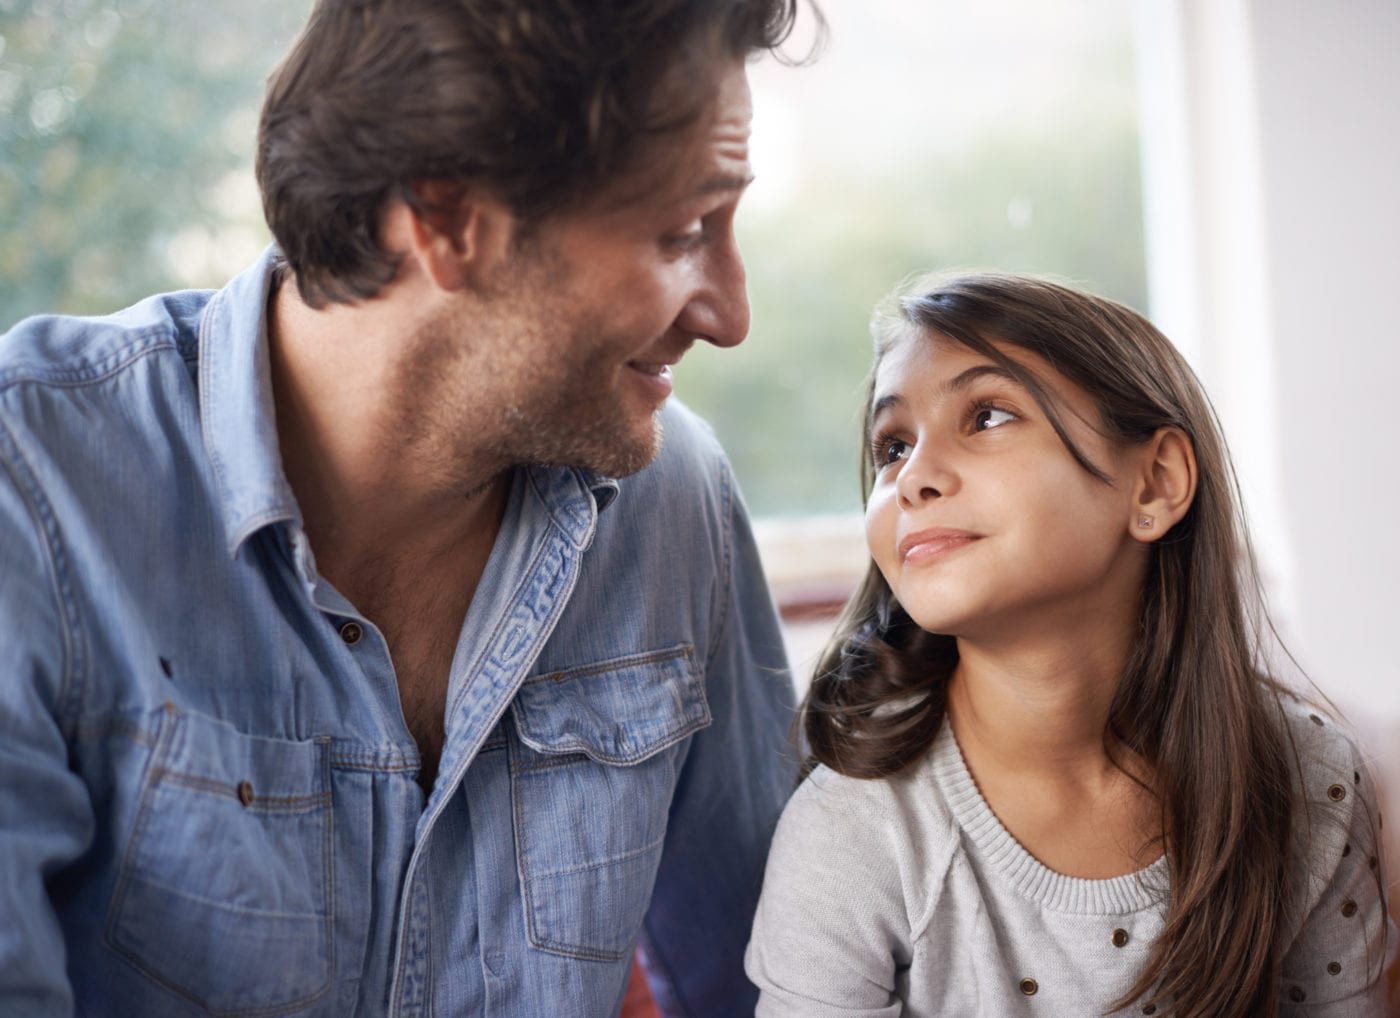 5 Reasons Your Kids Should Learn from Your Mistakes - All Pro Dad.